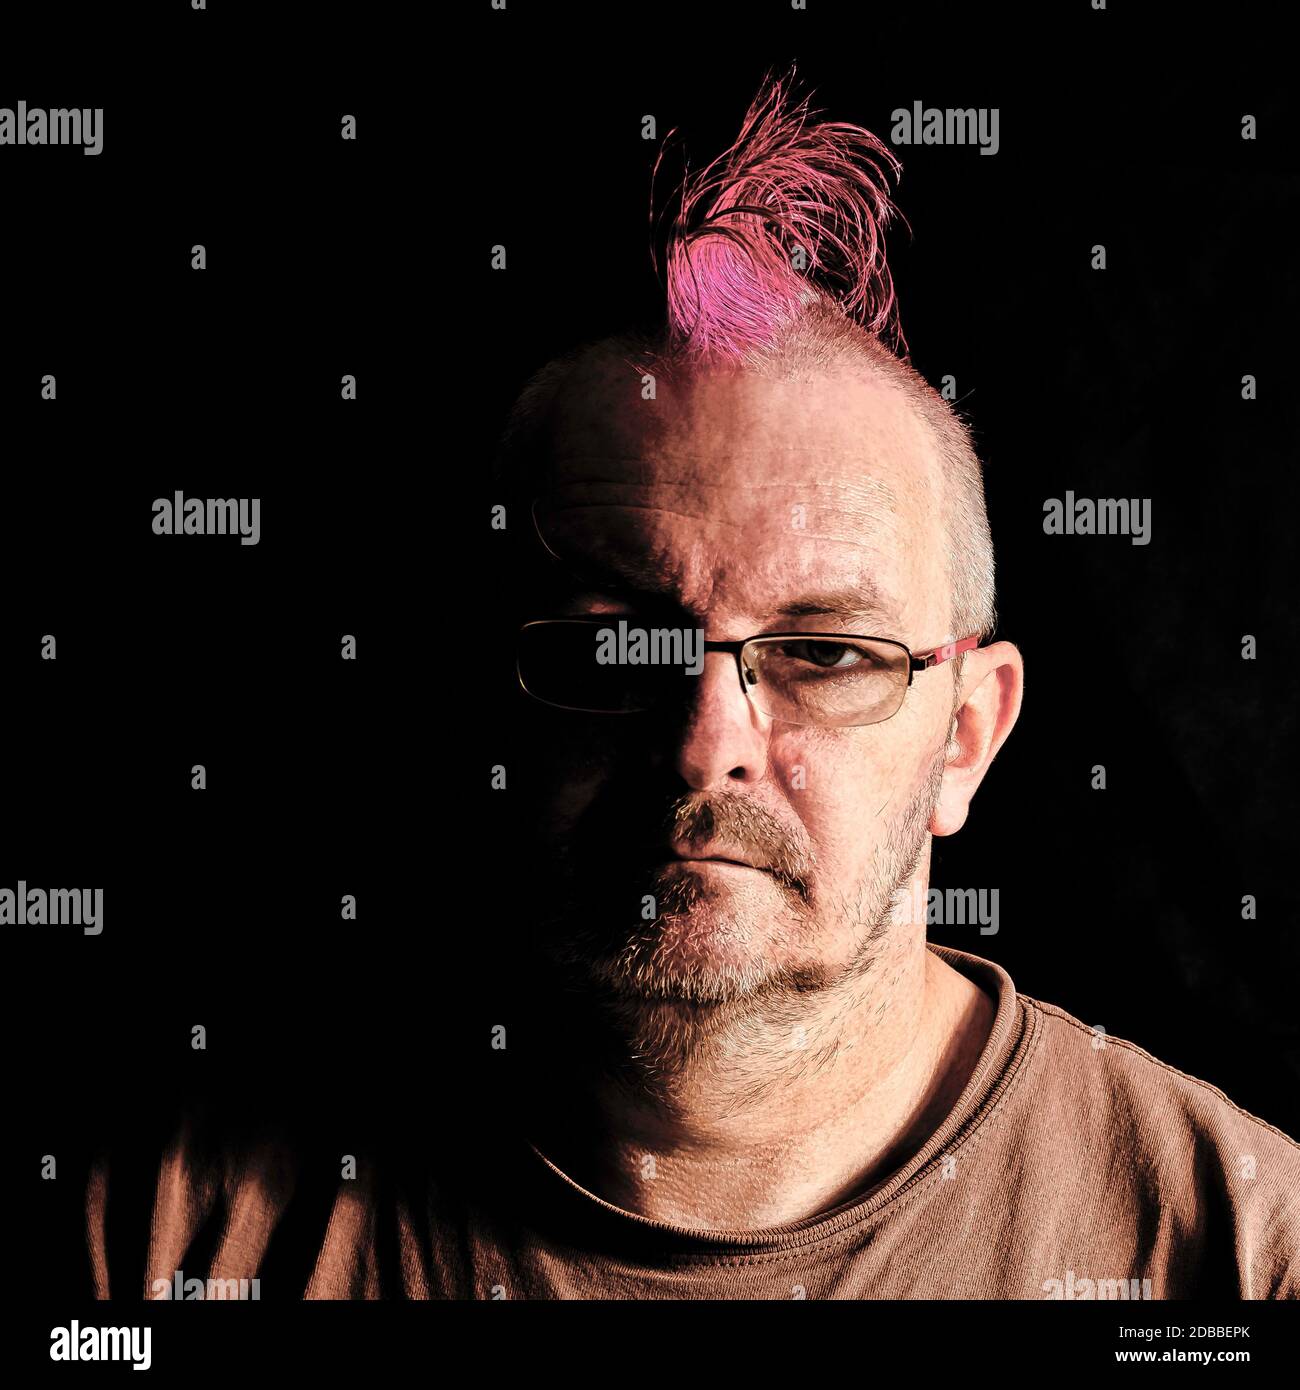 Male with mohawk hair in pink - London, United Kingdom Stock Photo